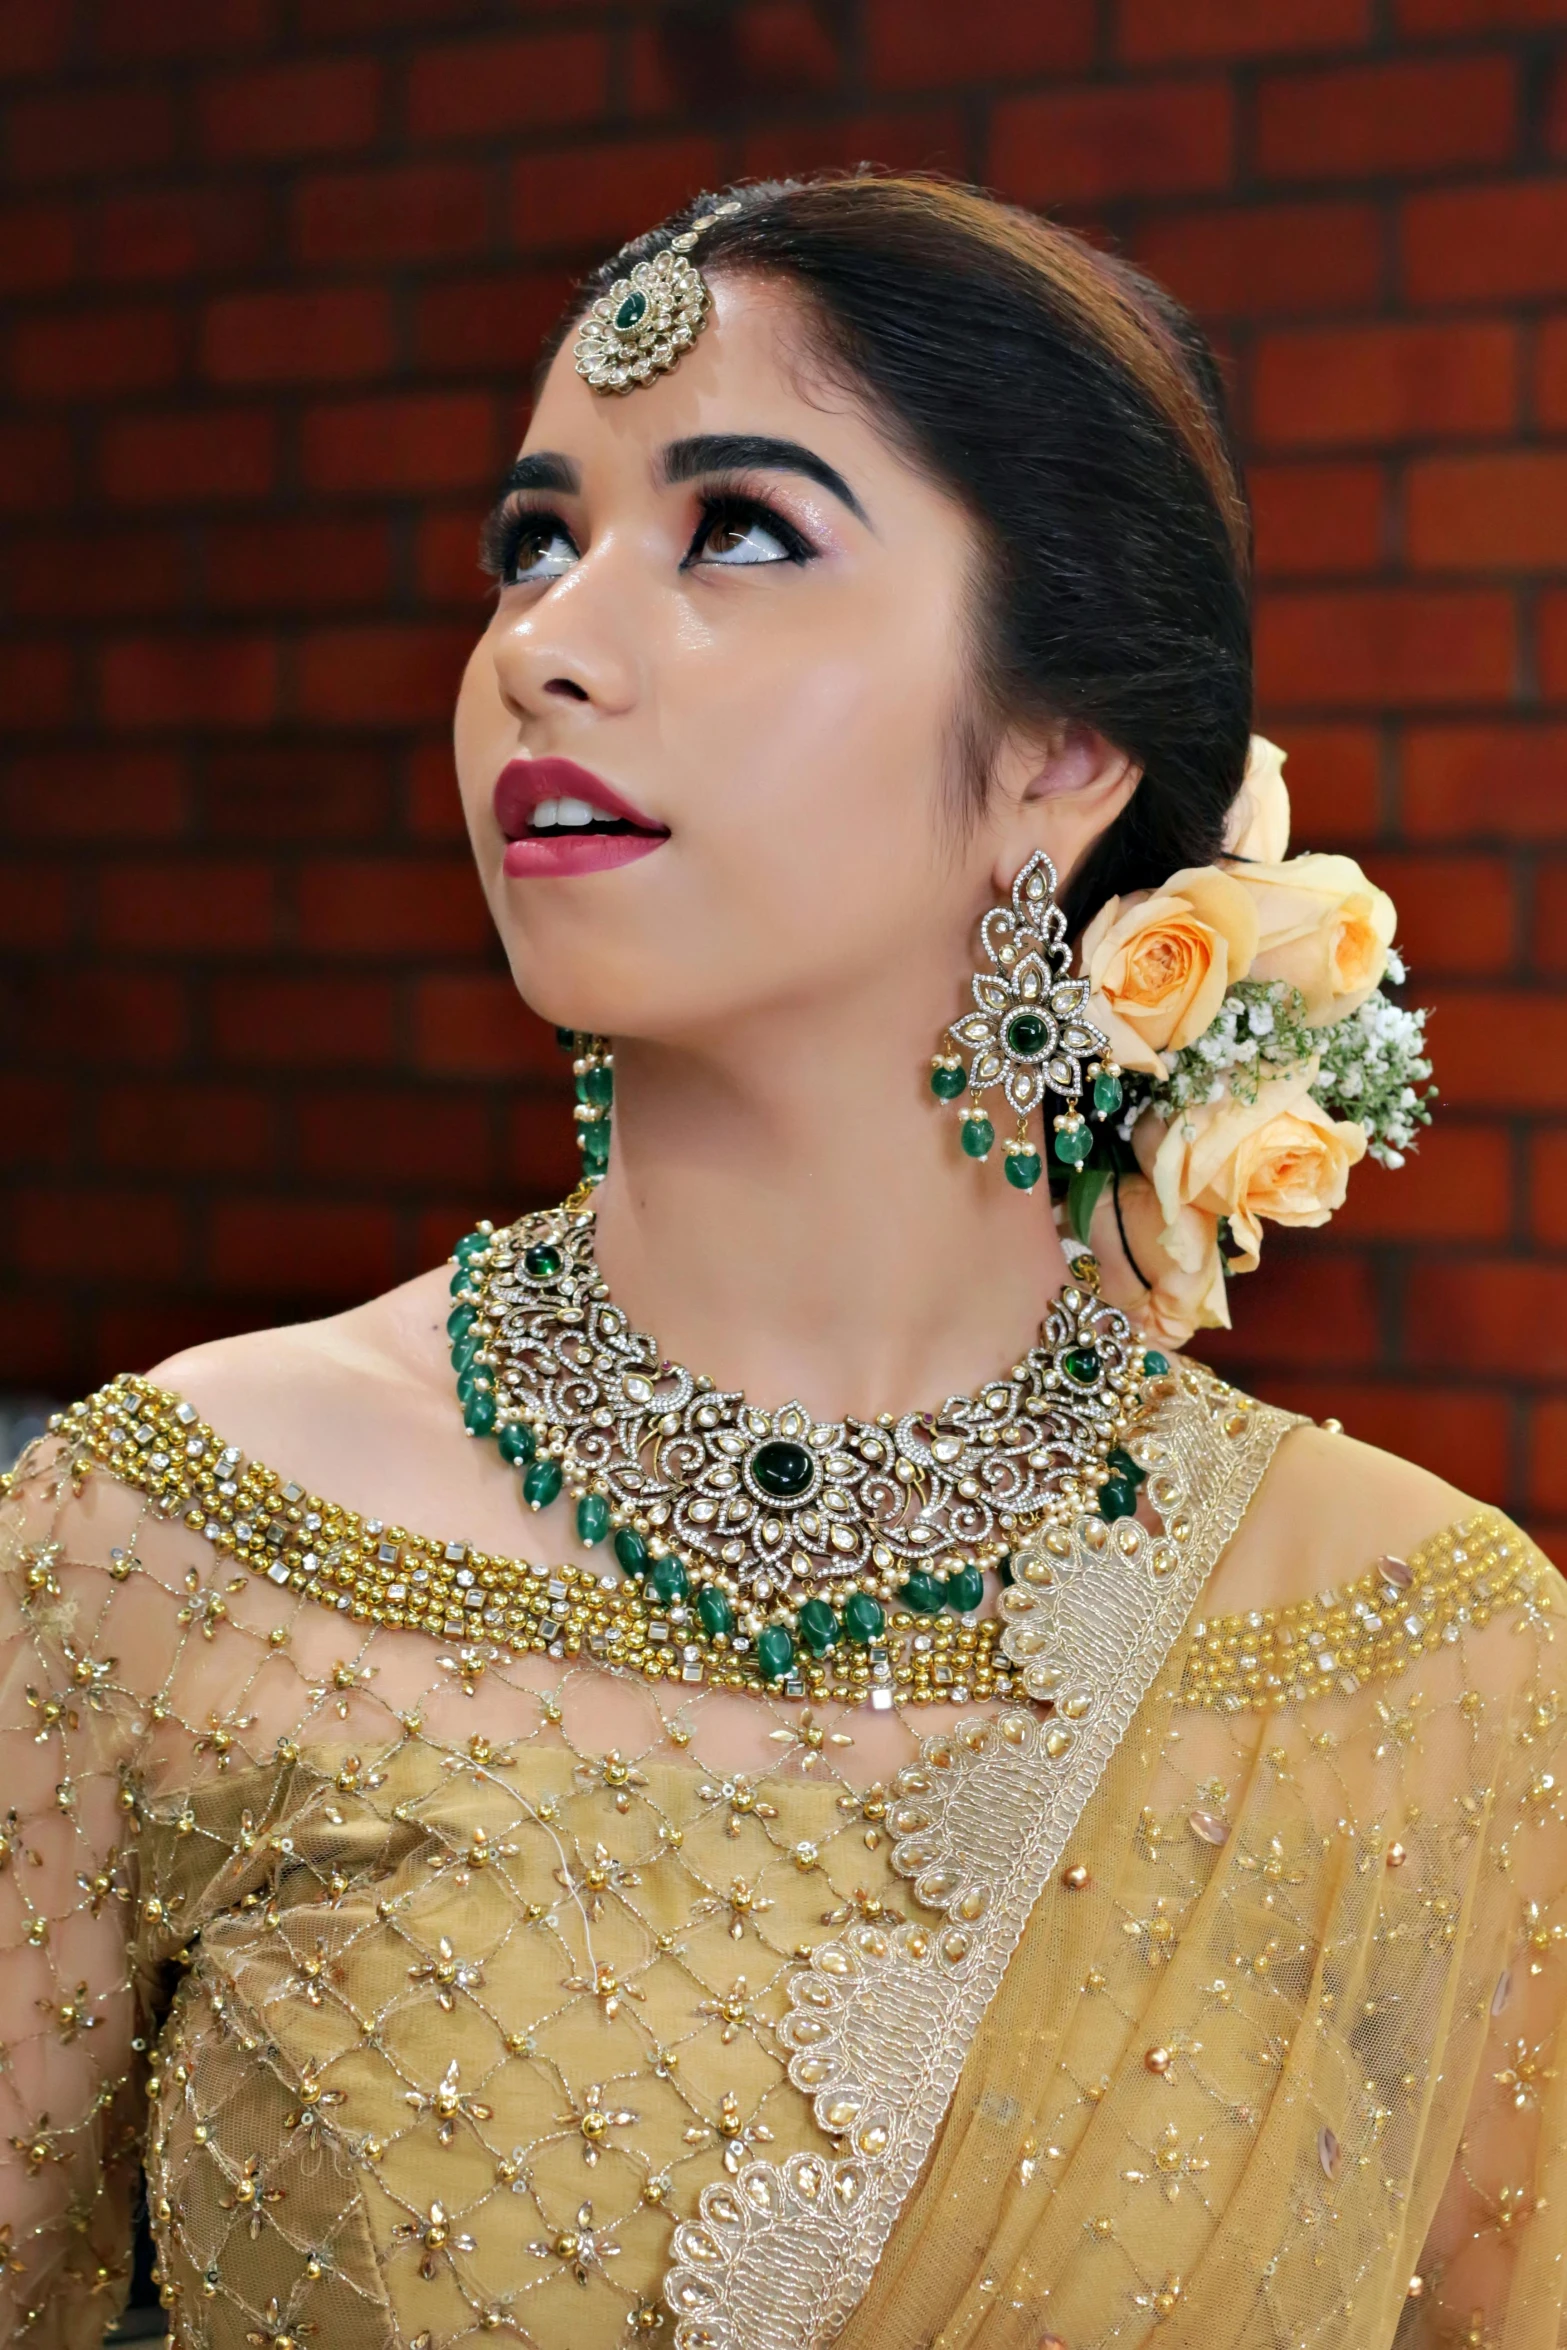 a woman in a gold outfit with roses and necklaces